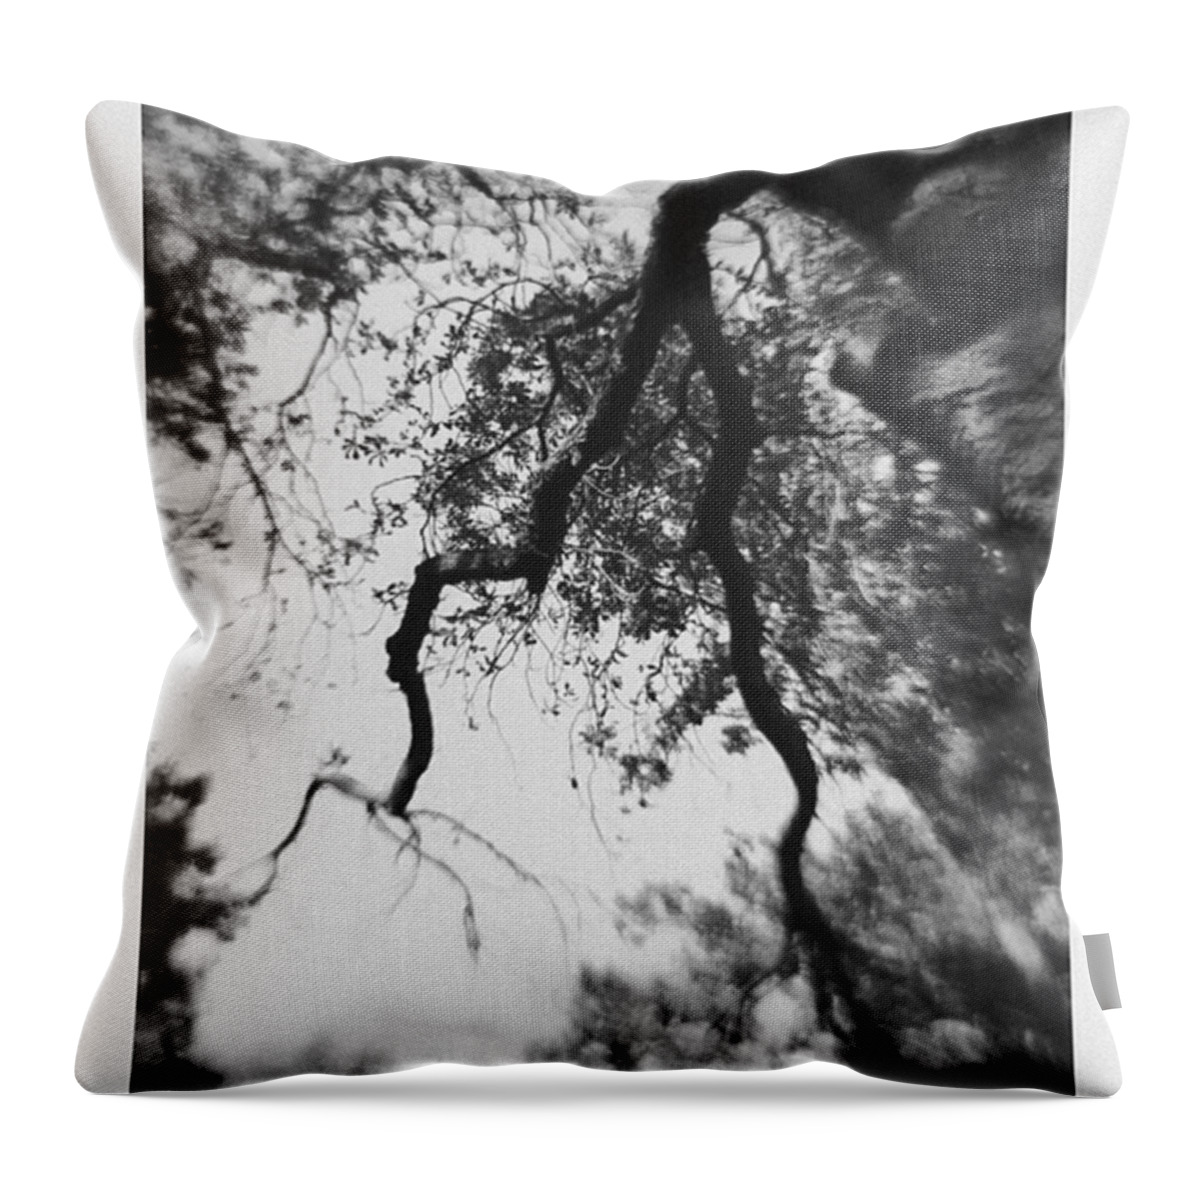 Composerpro Throw Pillow featuring the photograph #life #photorect #blackandwhite by Mandy Tabatt